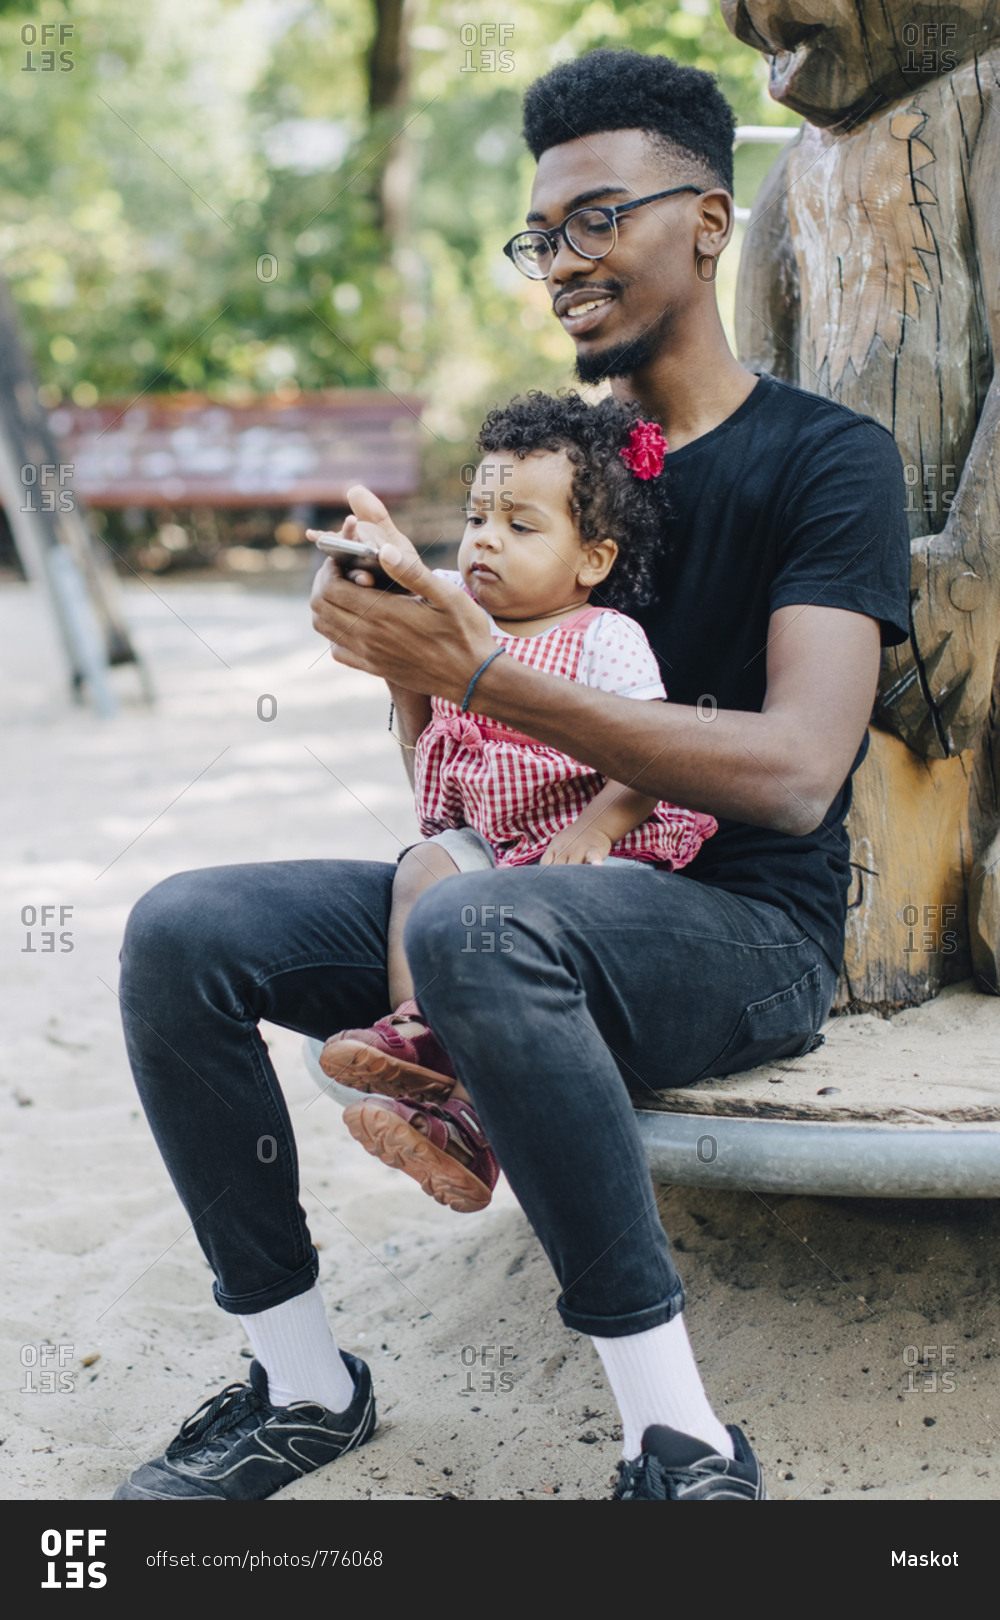 Baby girl using mobile phone while sitting with father on outdoor play equipment at playground